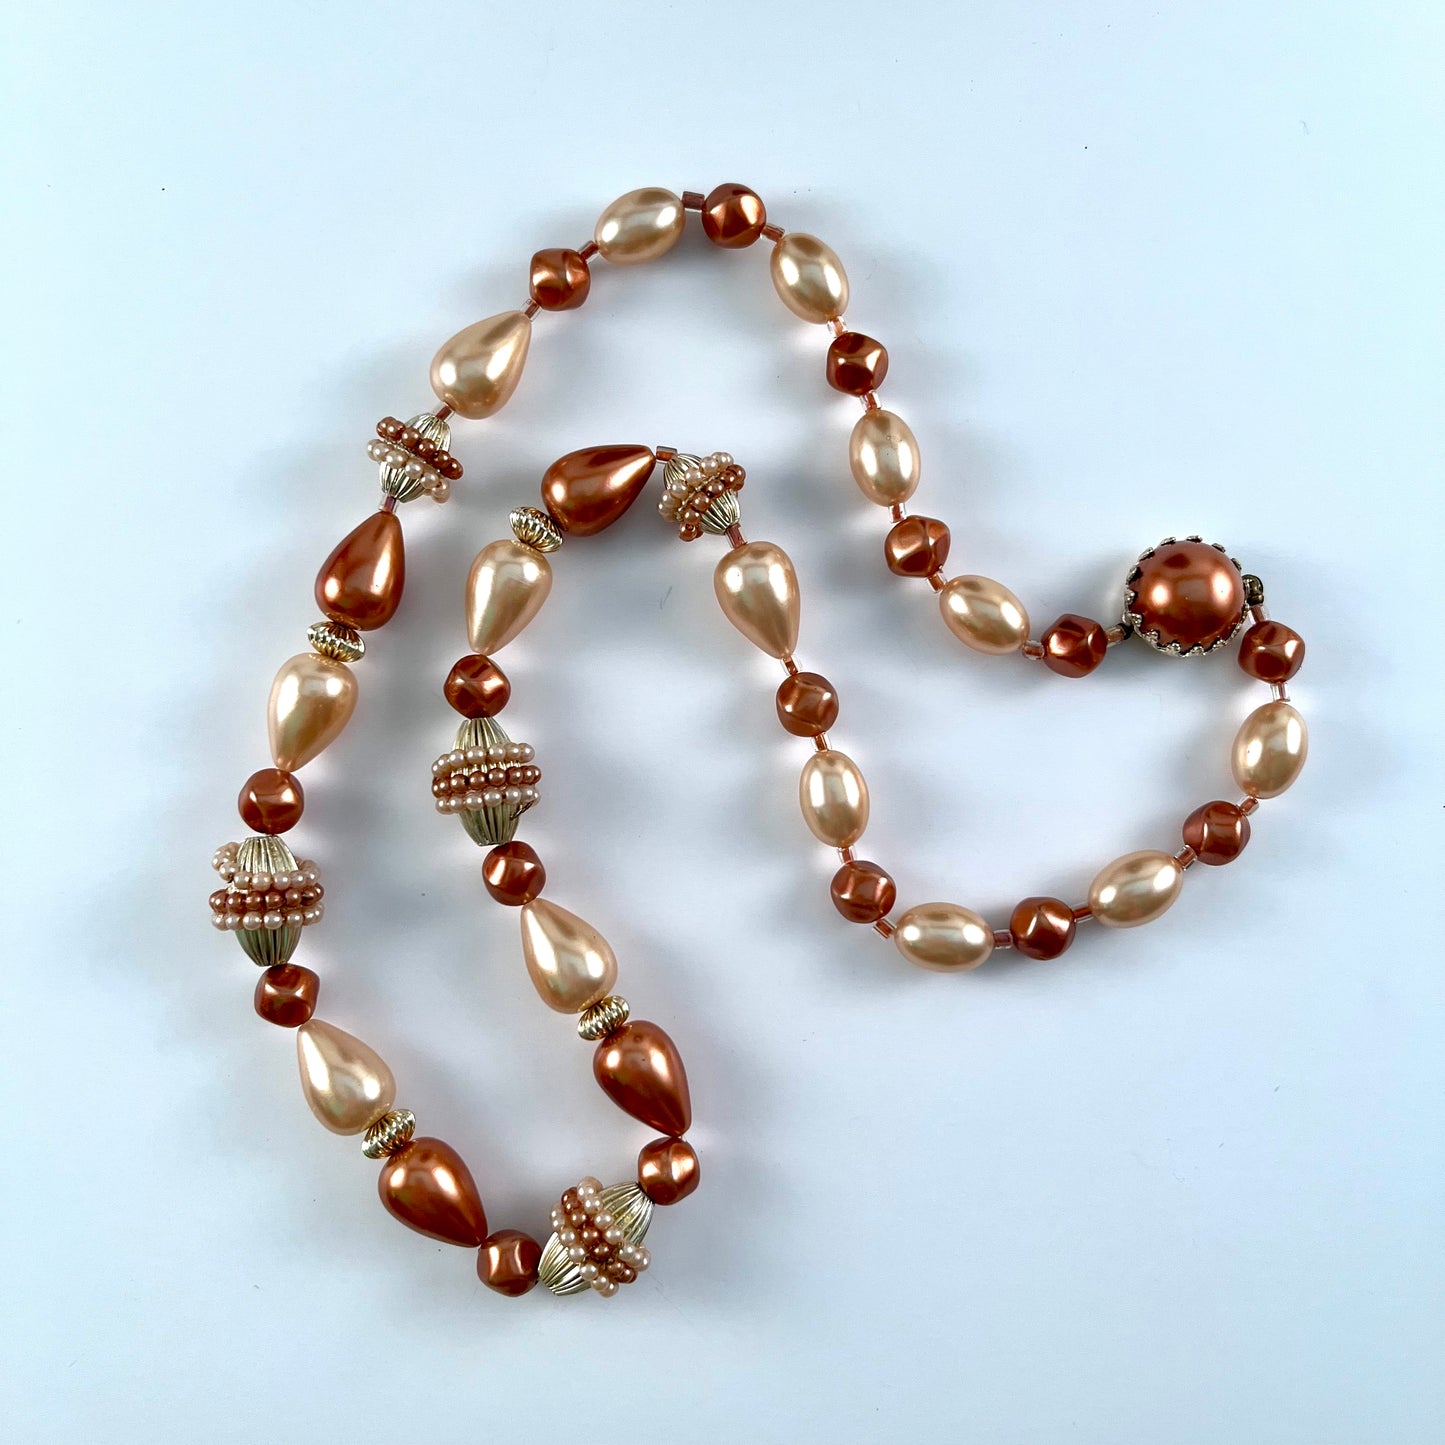 1960s Japan Bead Necklace